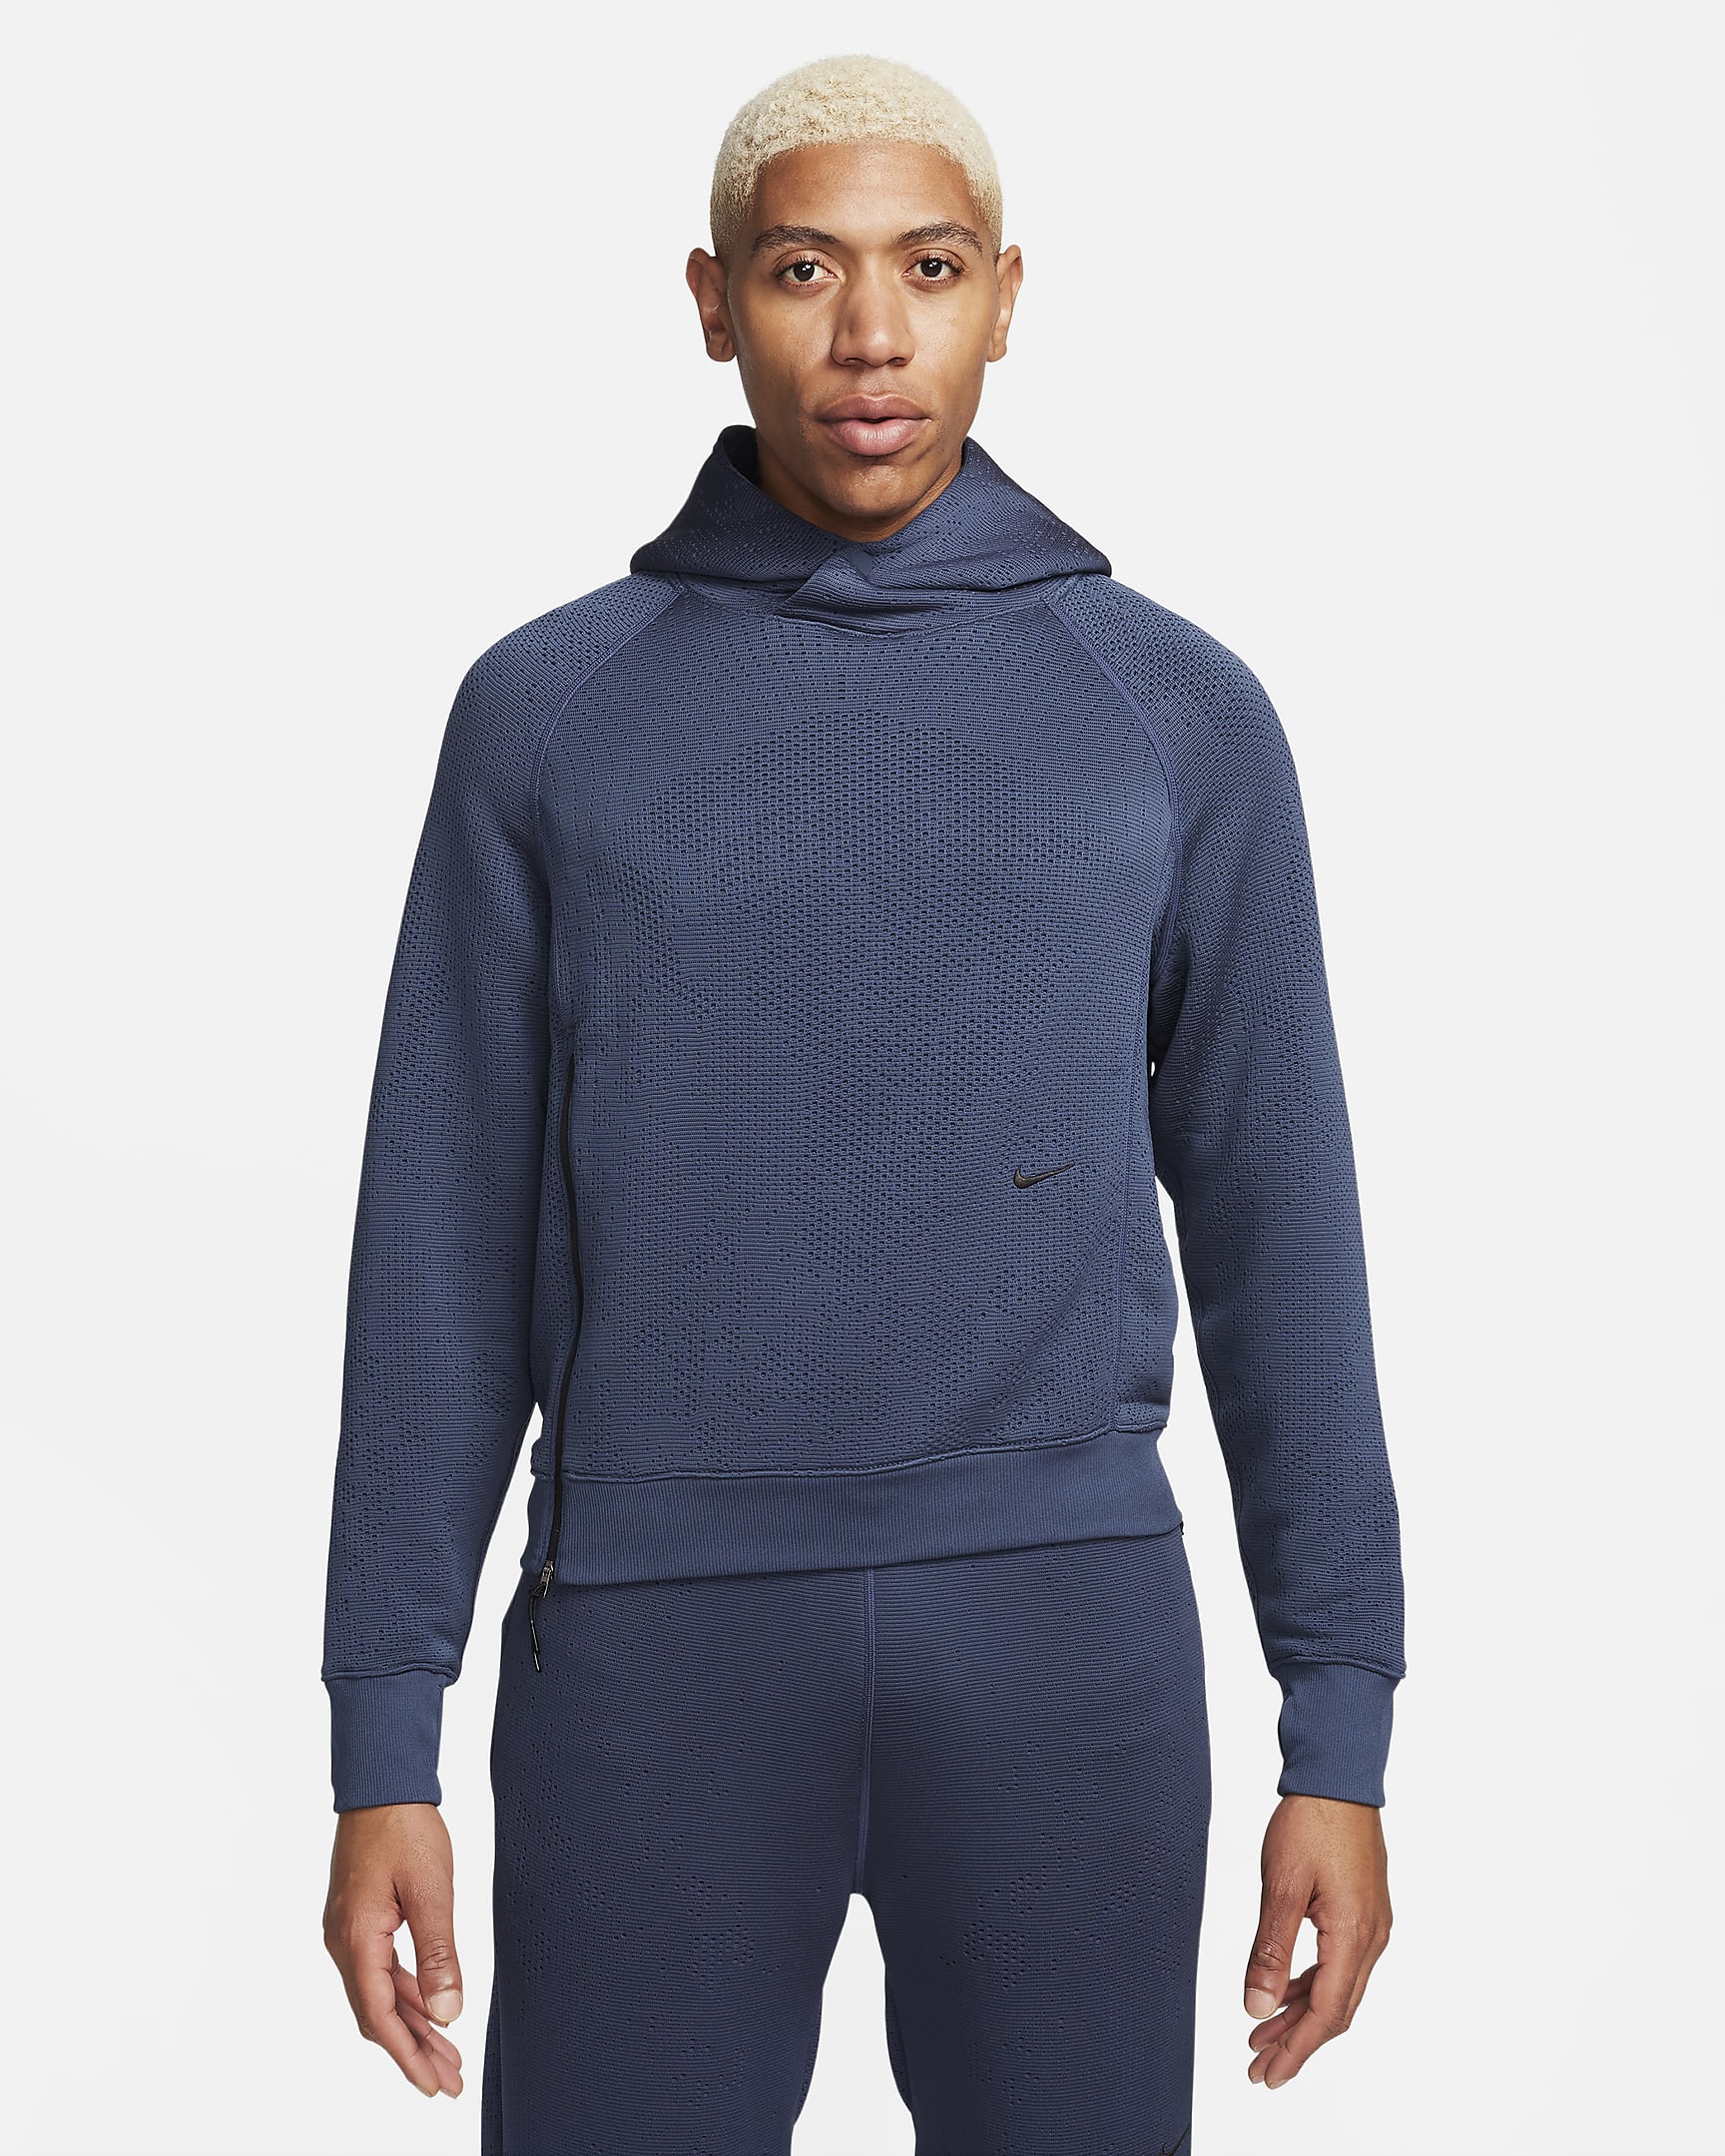 Nike Therma-FIT ADV A.P.S. Men's Hooded Versatile Top. Nike.com